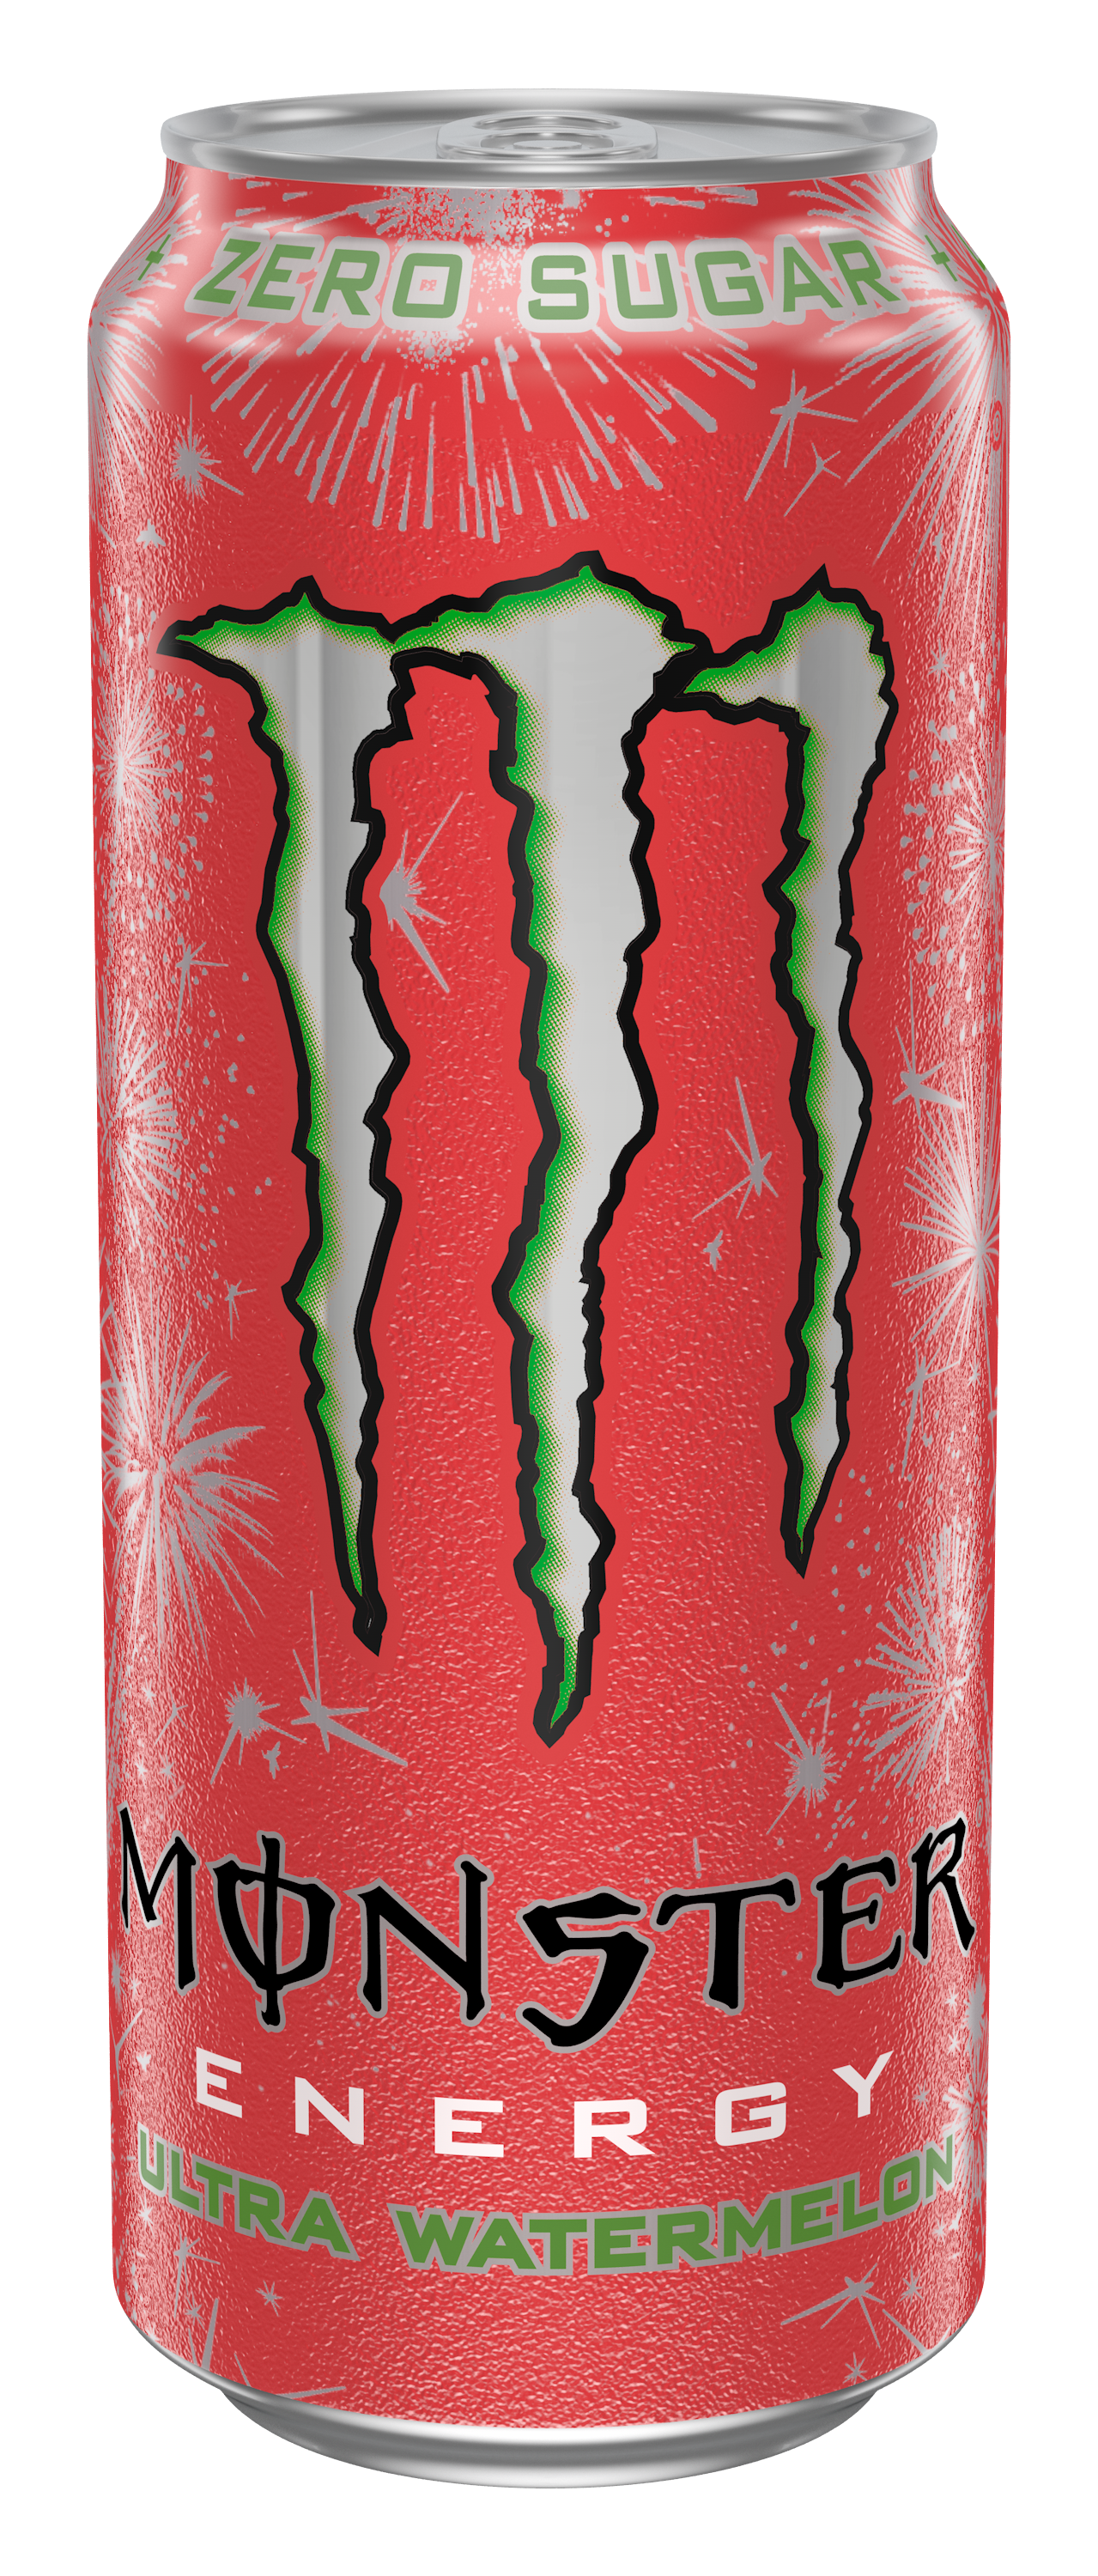 UK_Monster_Ultra Watermelon_500ml_Can_POS_0721 (3)